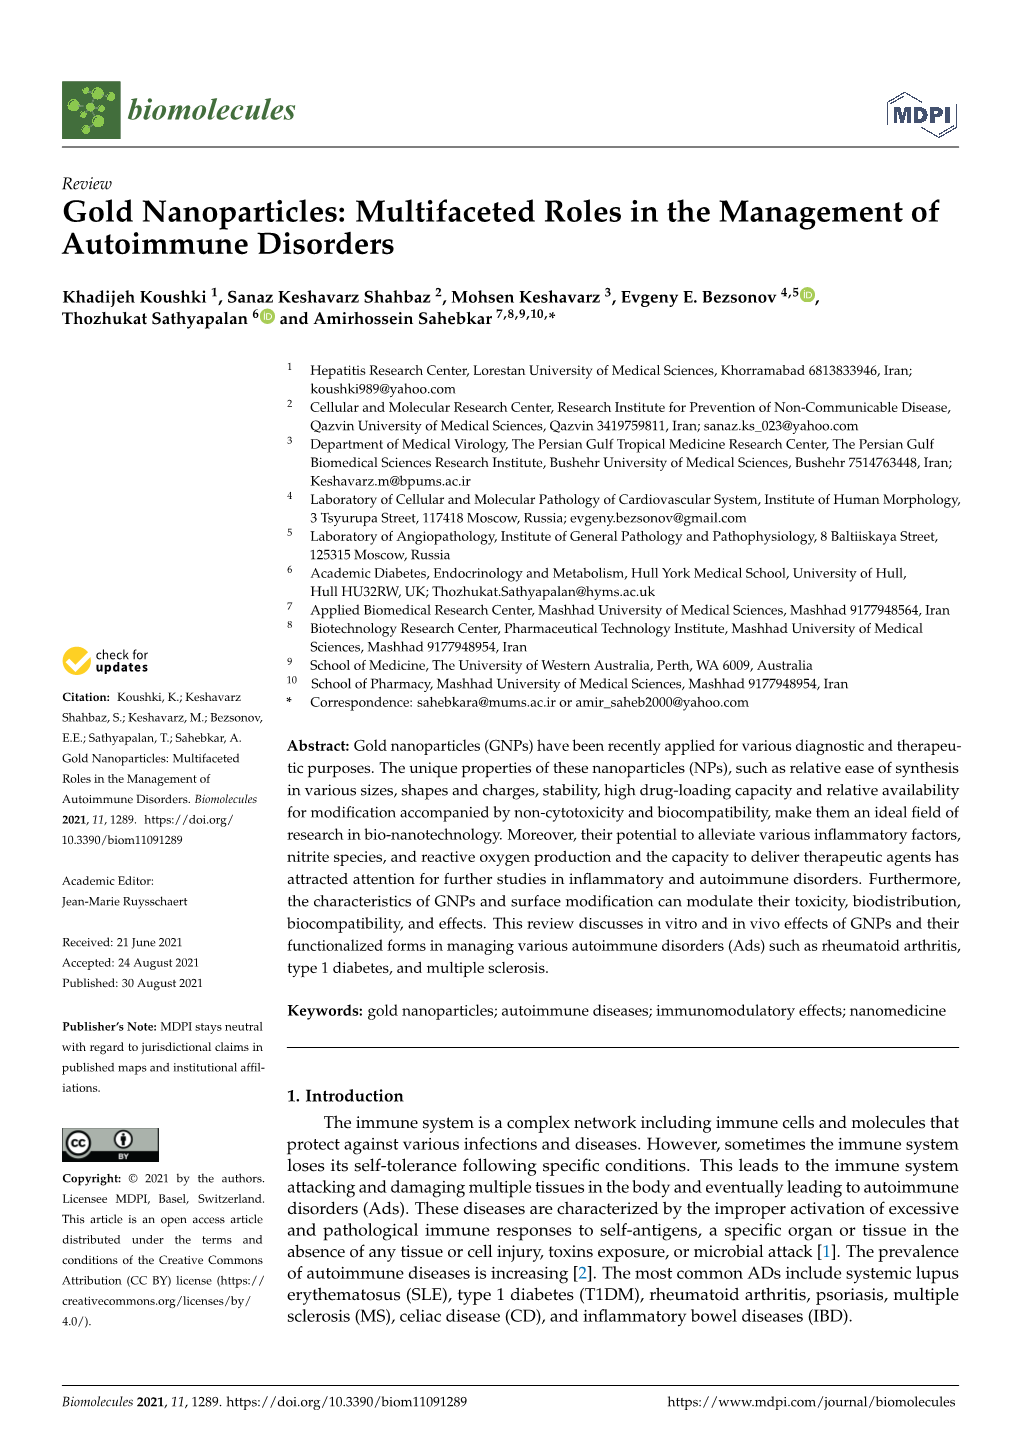 Gold Nanoparticles: Multifaceted Roles in the Management of Autoimmune Disorders